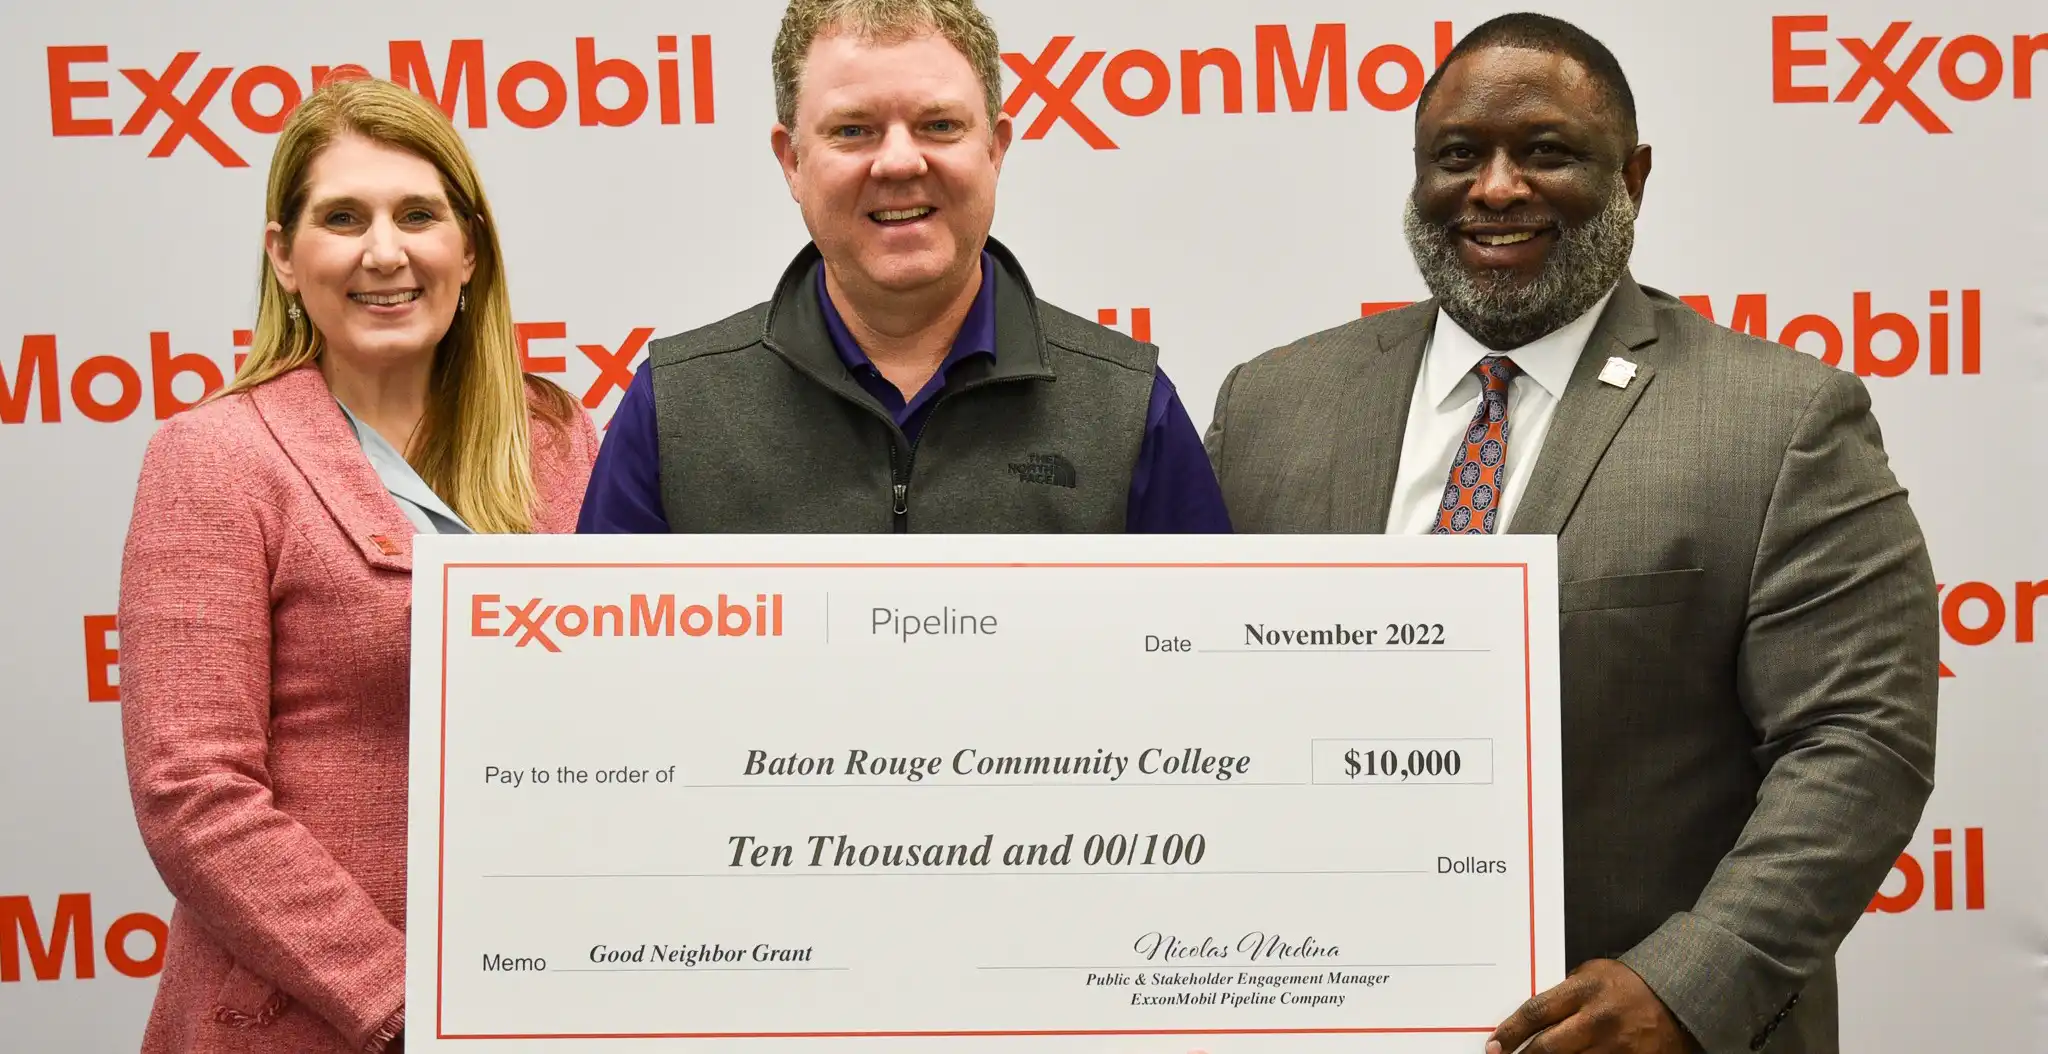 ExxonMobil Pipeline Company presents a $10,000 donation to the Baton Rouge Community College Foundation to assist with workforce development needs and programs. Pictured (l to r): BRCC Vice Chancellor for Institutional Advancement Pilar Blanco Eble, Ed.D., ExxonMobil Pipeline Company Public and  Stakeholder Engagement Lead Michael Smith; and BRCC Chancellor Willie E. Smith, Ph.D.